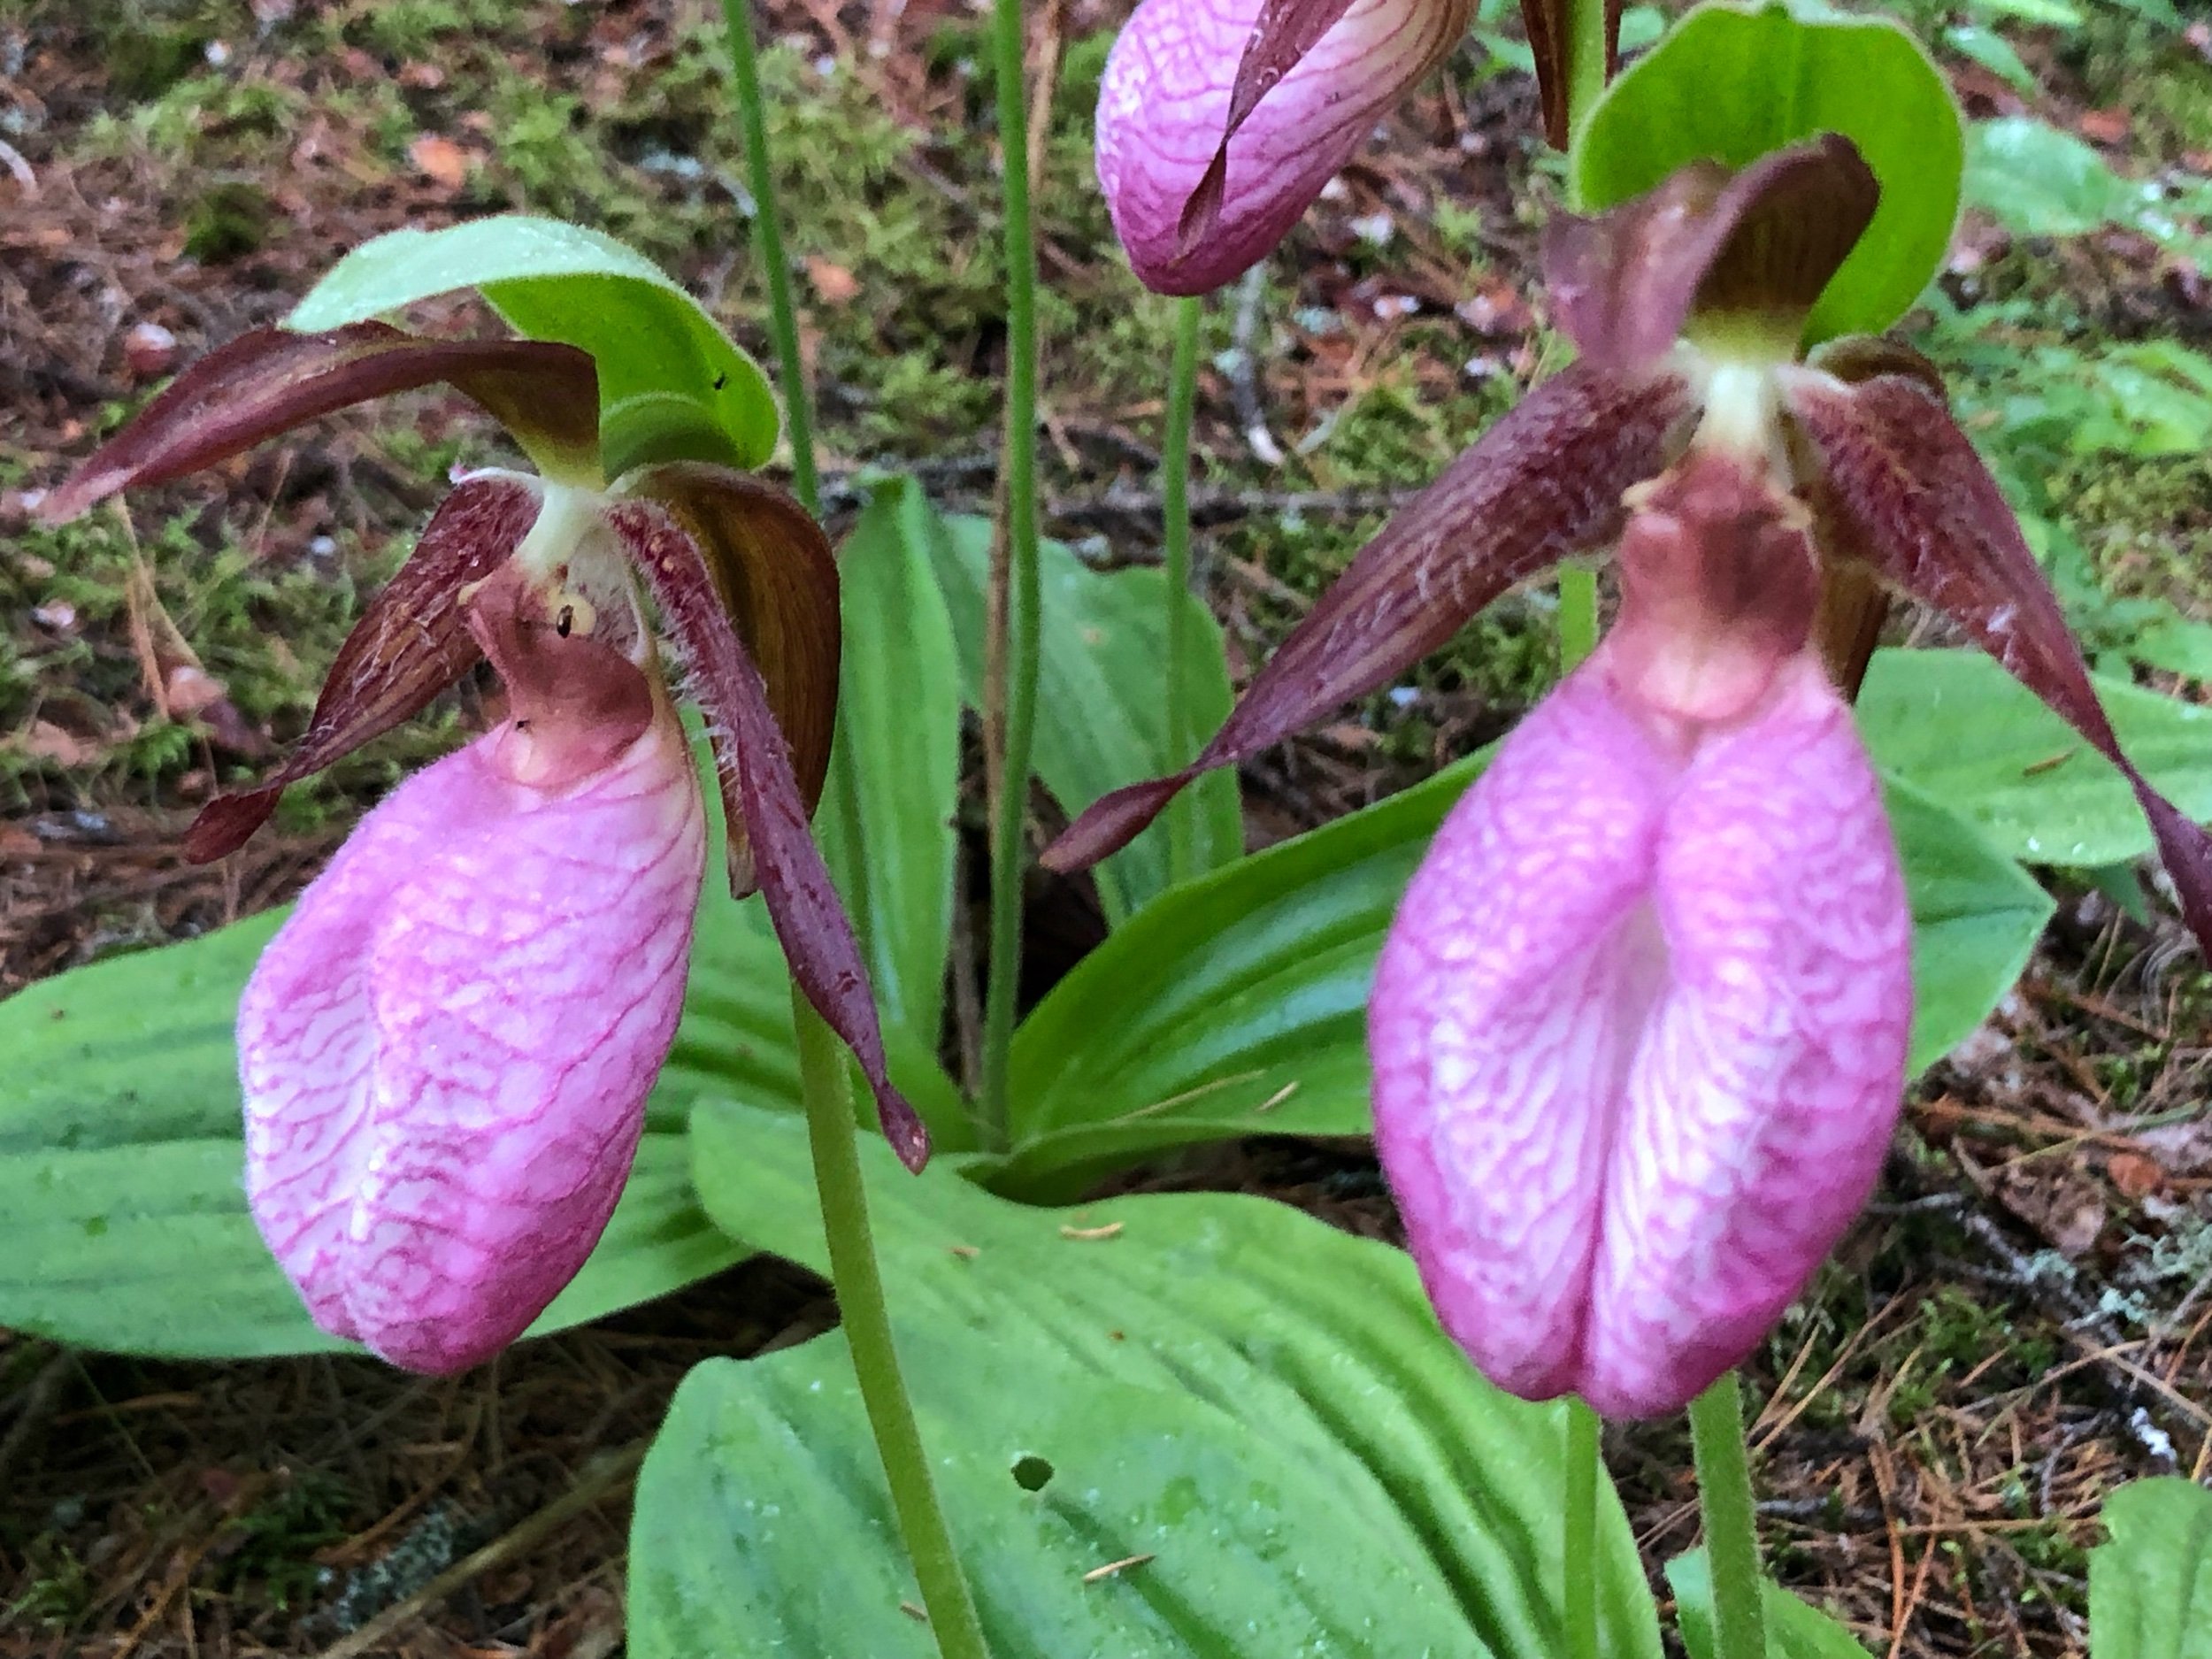  There were pink lady slippers all along the hike. I haven’t see these in years! 